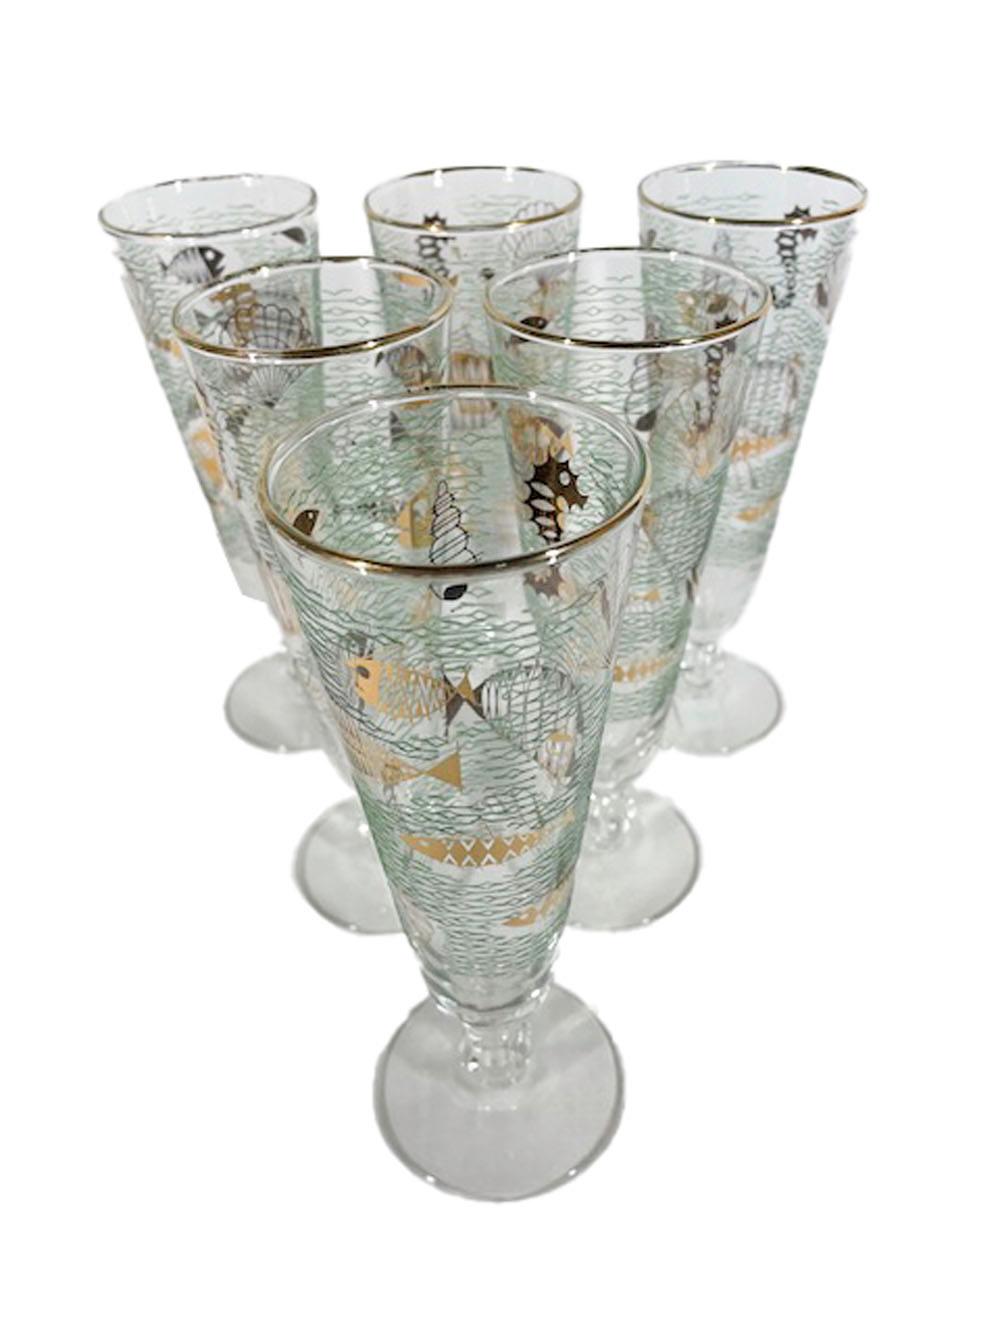 Six mid-century modern pilsner glasses in the Marine Life pattern by Libbey Glass Company, having a raised translucent green enamel wave patterned ground with 22k gold stylized fish and other sea creatures.